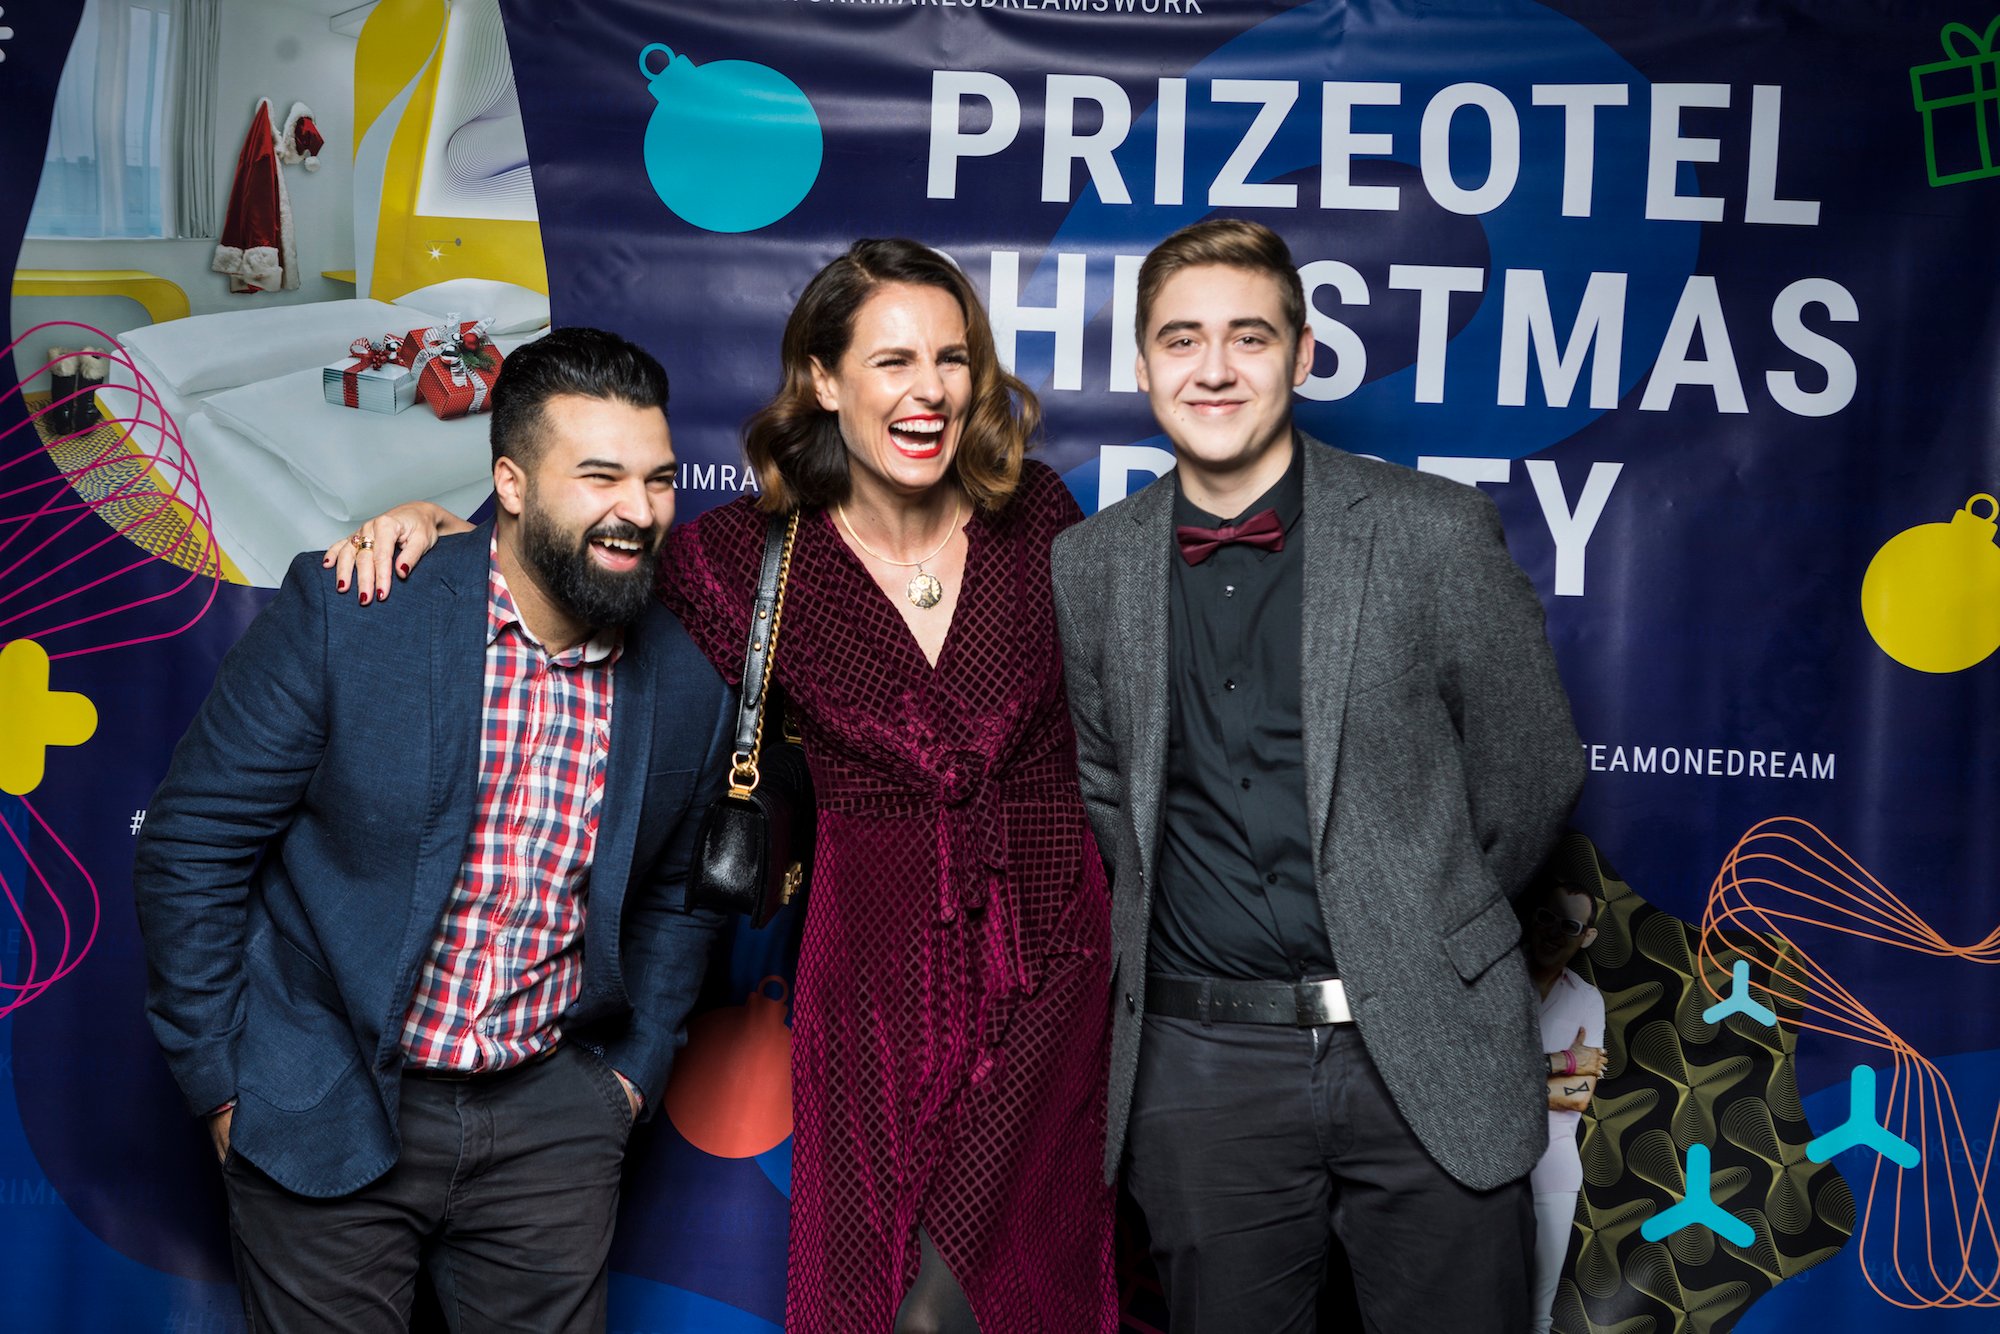 Three prizeotel employees at the Christmas party laughing